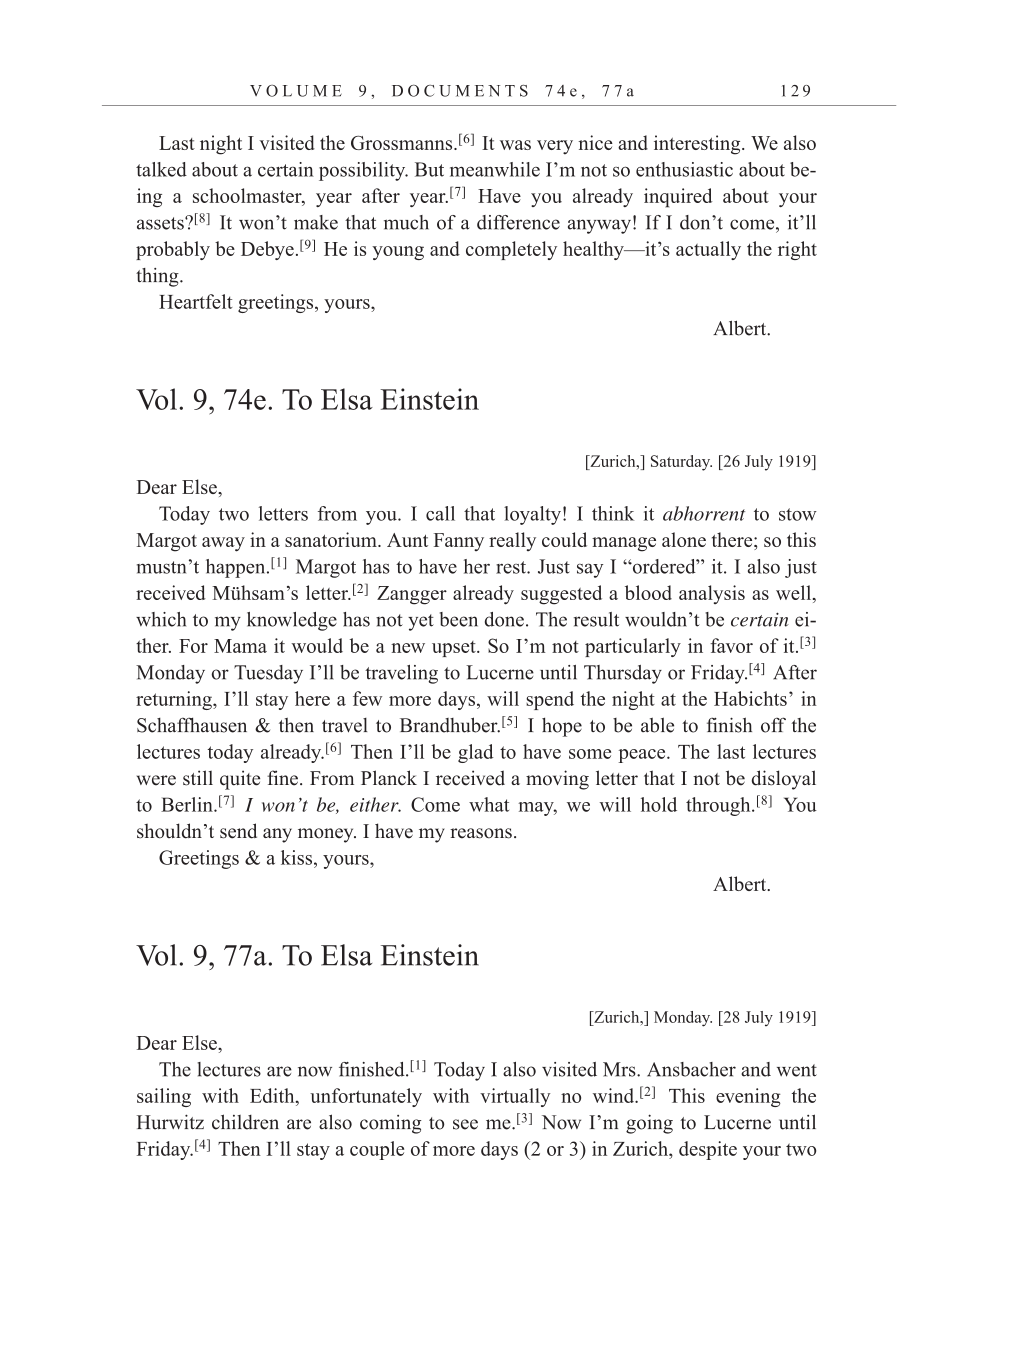 Volume 10: The Berlin Years: Correspondence, May-December 1920, and Supplementary Correspondence, 1909-1920 (English translation supplement) page 129